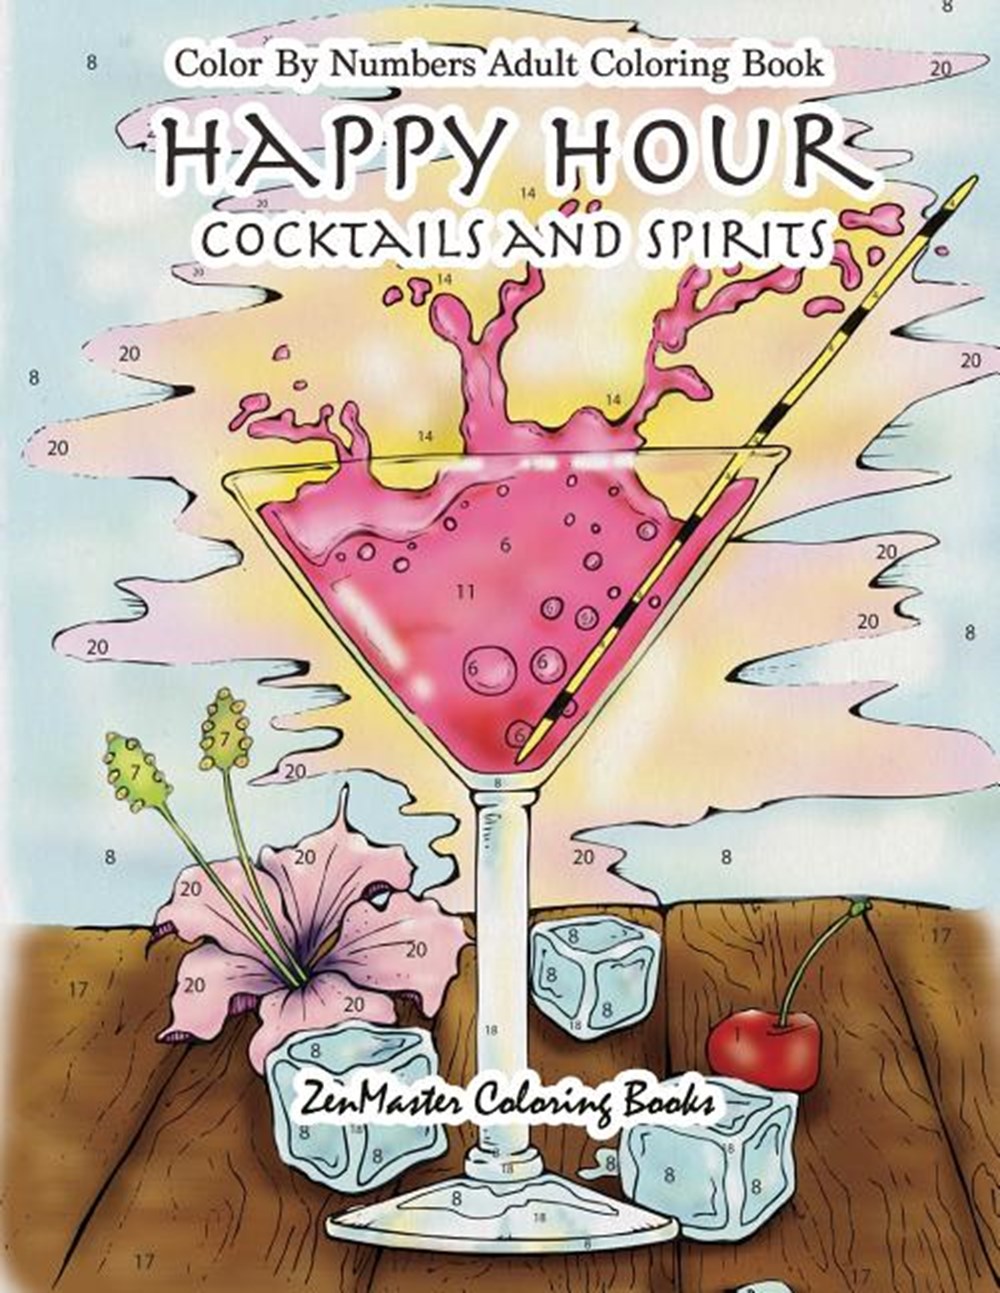 Color By Numbers Adult Coloring Book: Happy Hour: Cocktails and Spirits